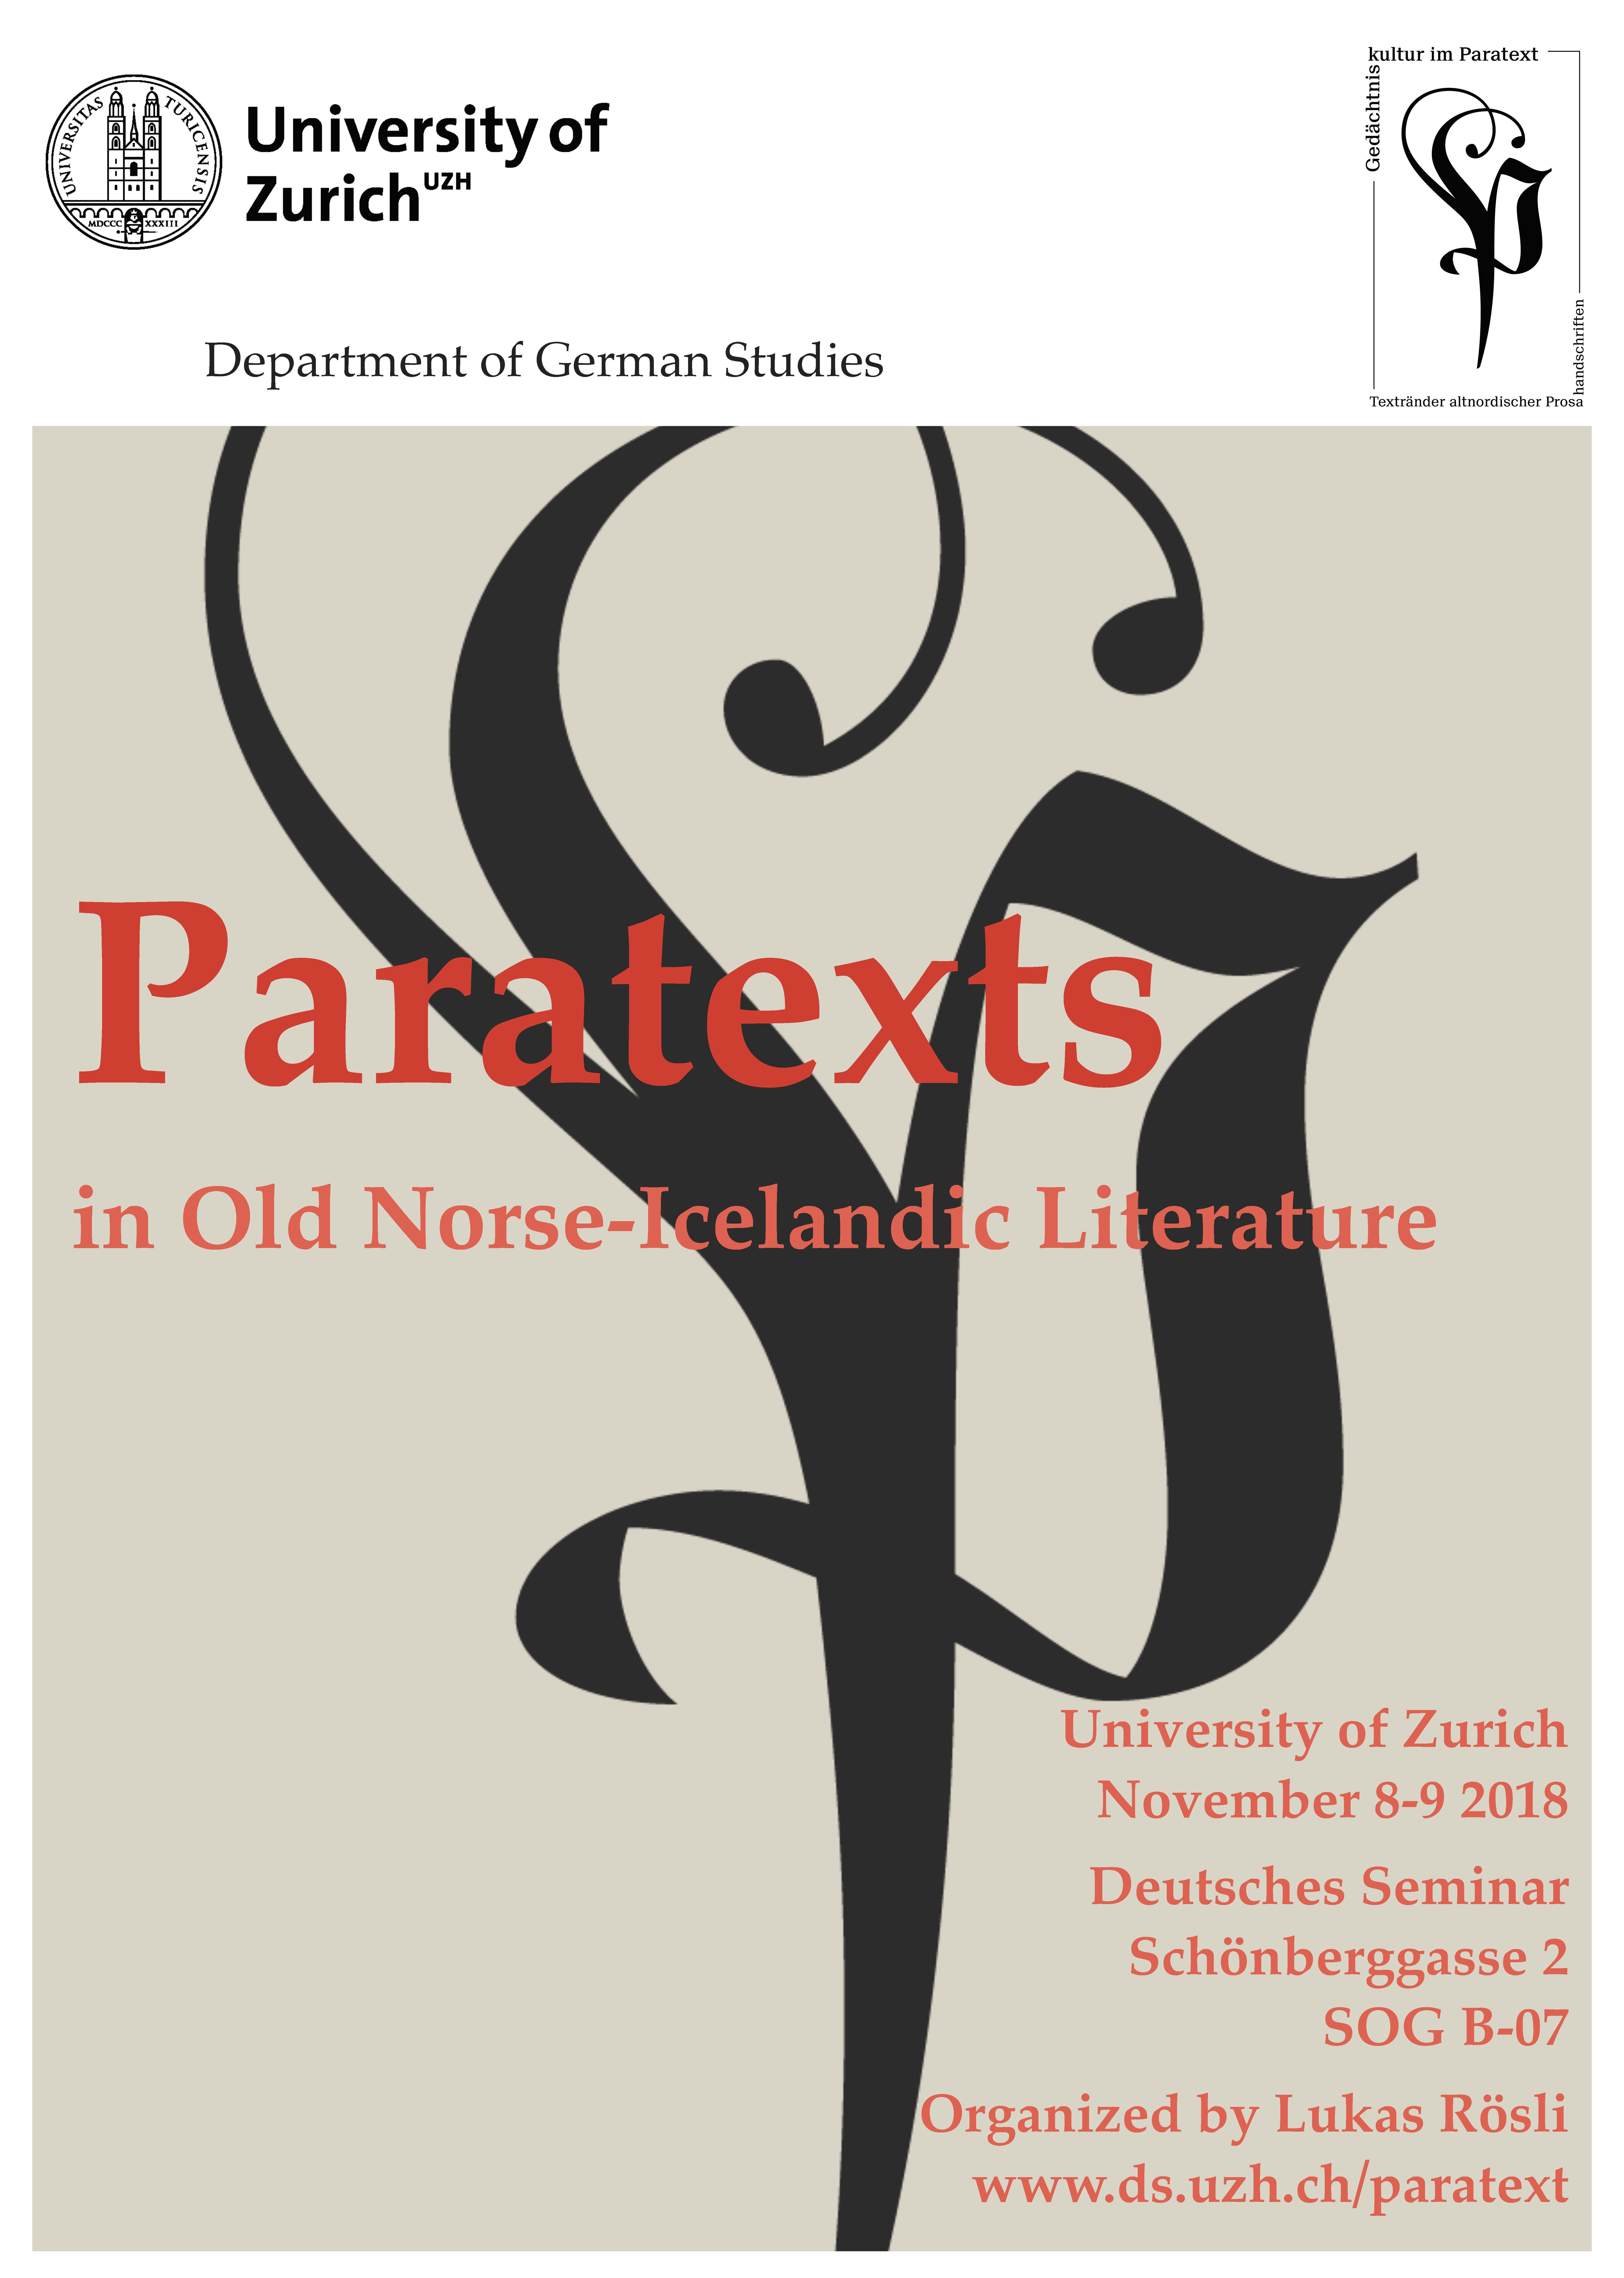 Workshop: Paratext in Old Norse-Icelandic Literature